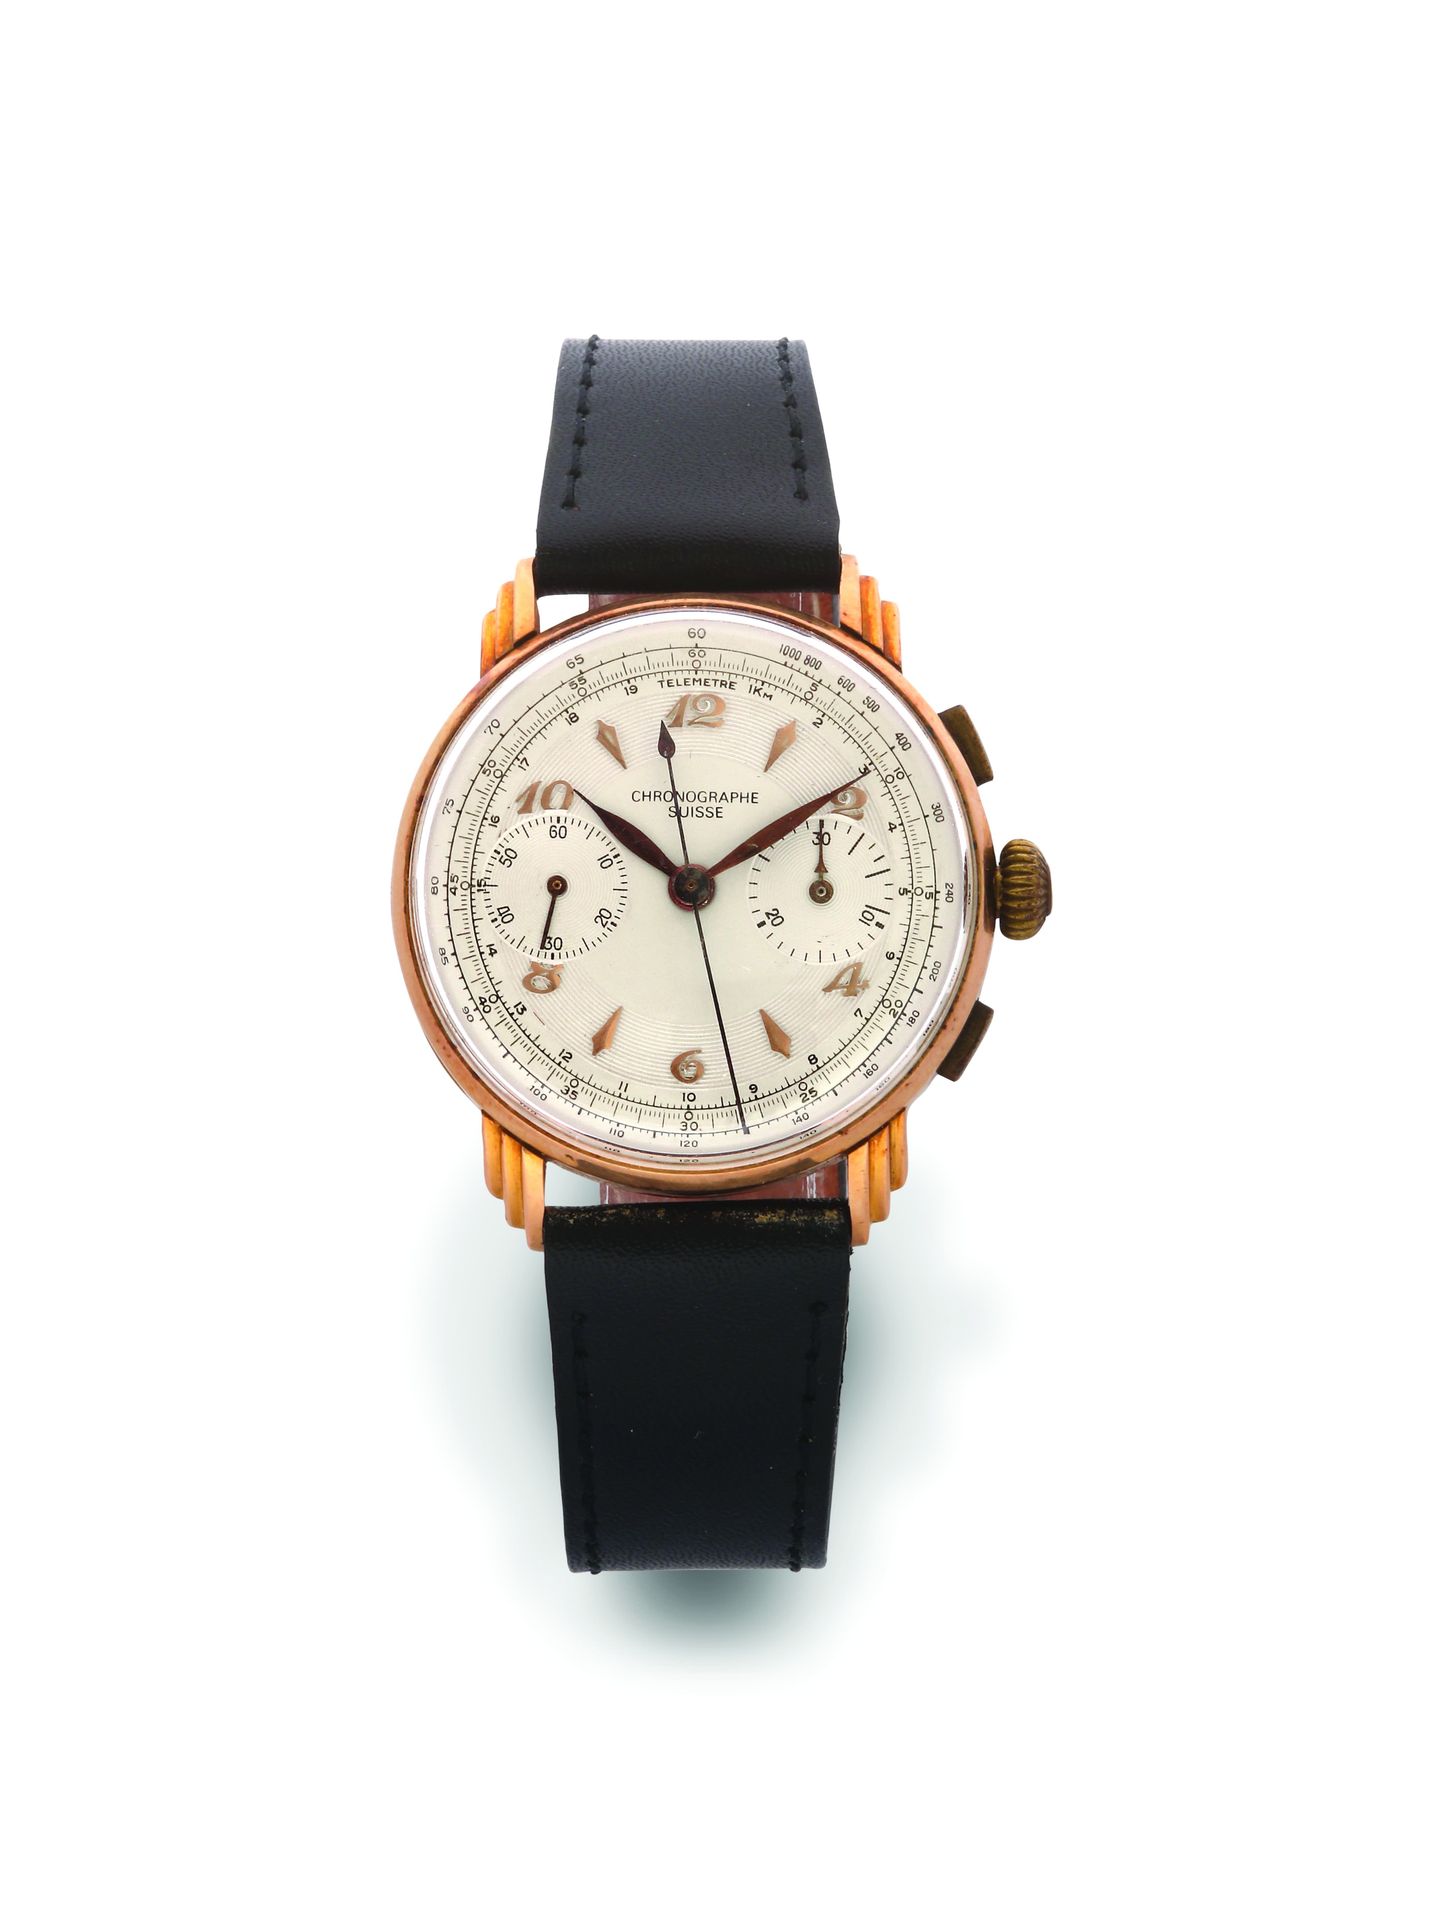 CHRONOGRAPHE SUISSE Art Deco handles
Chronograph watch in 18K 750 rose gold with&hellip;